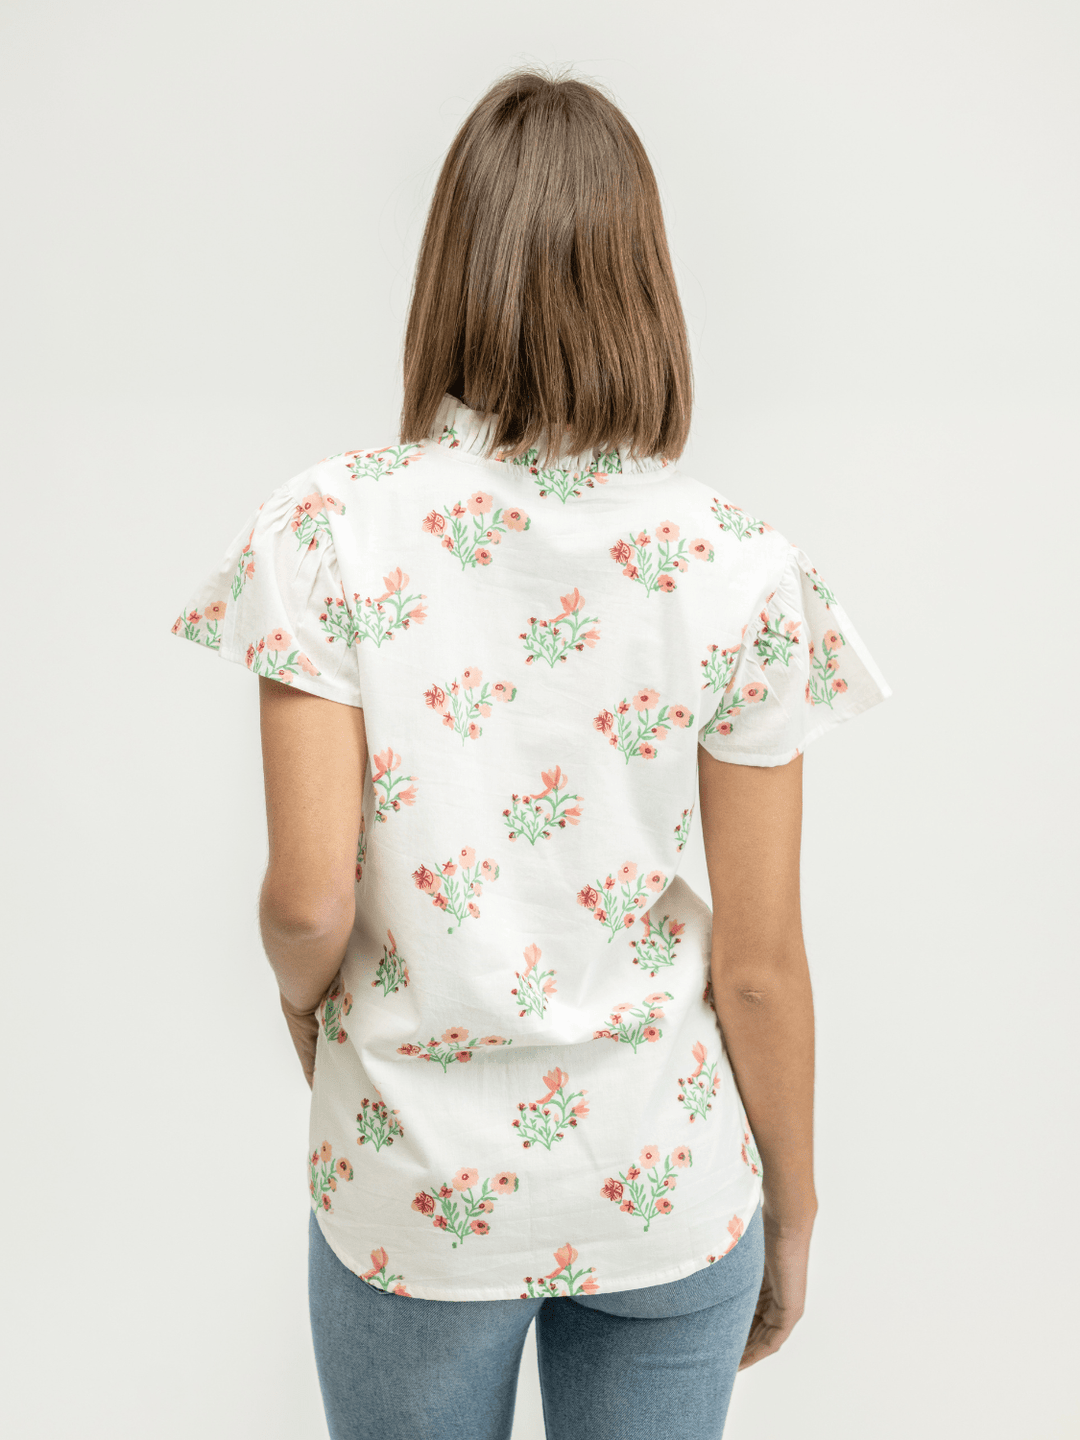 Beau & Ro Top The Flutter Top | Pink Floral